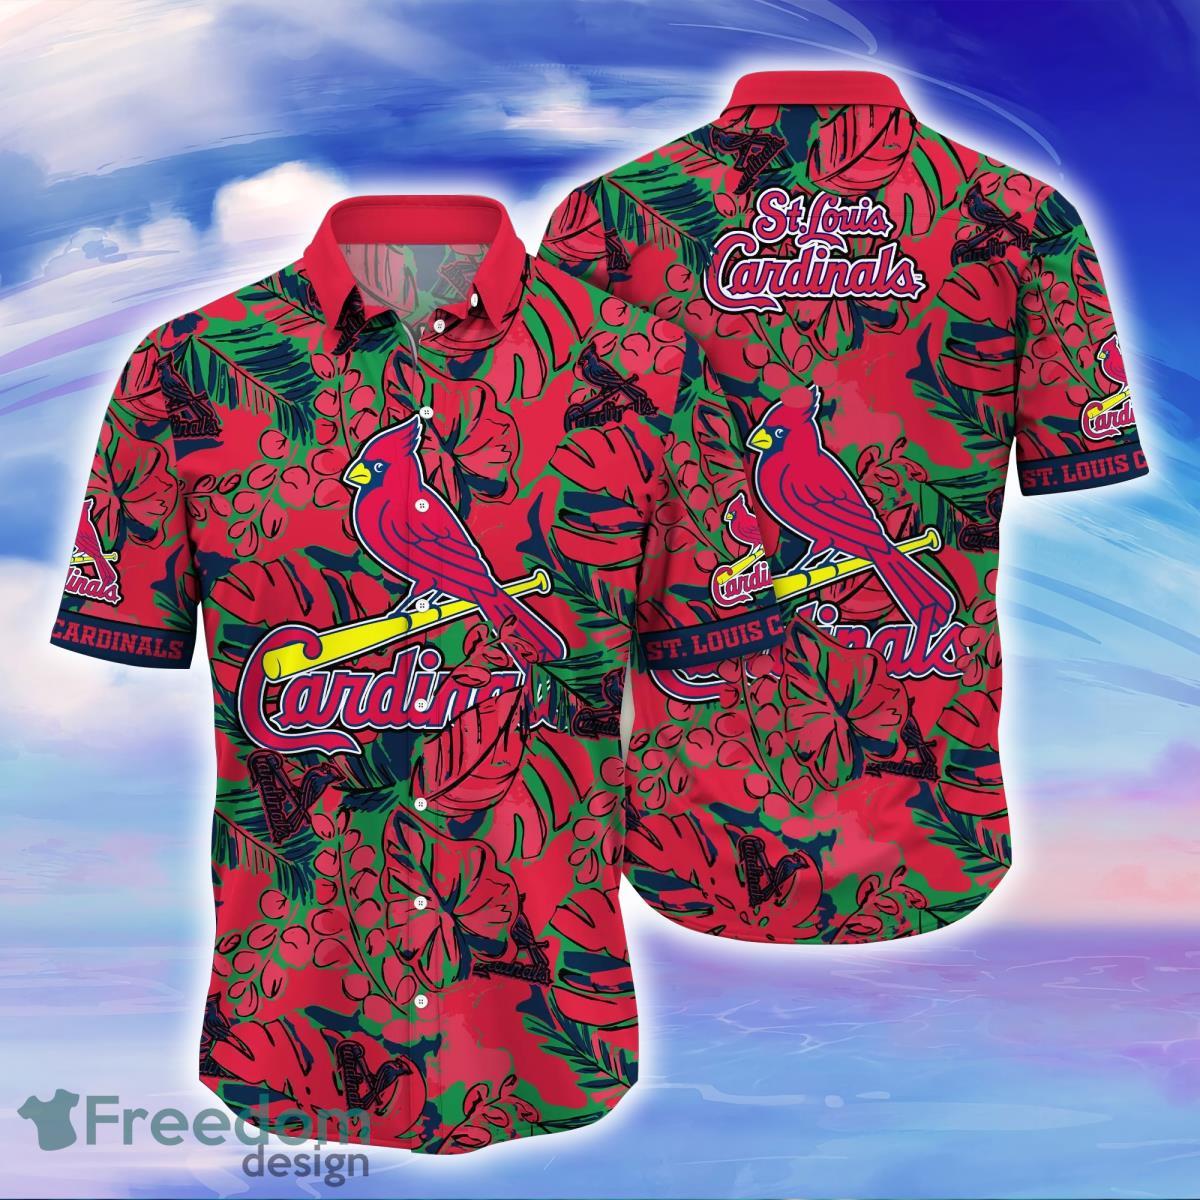 St. Louis Cardinals MLB Flower Hawaii Shirt And Tshirt For Fans